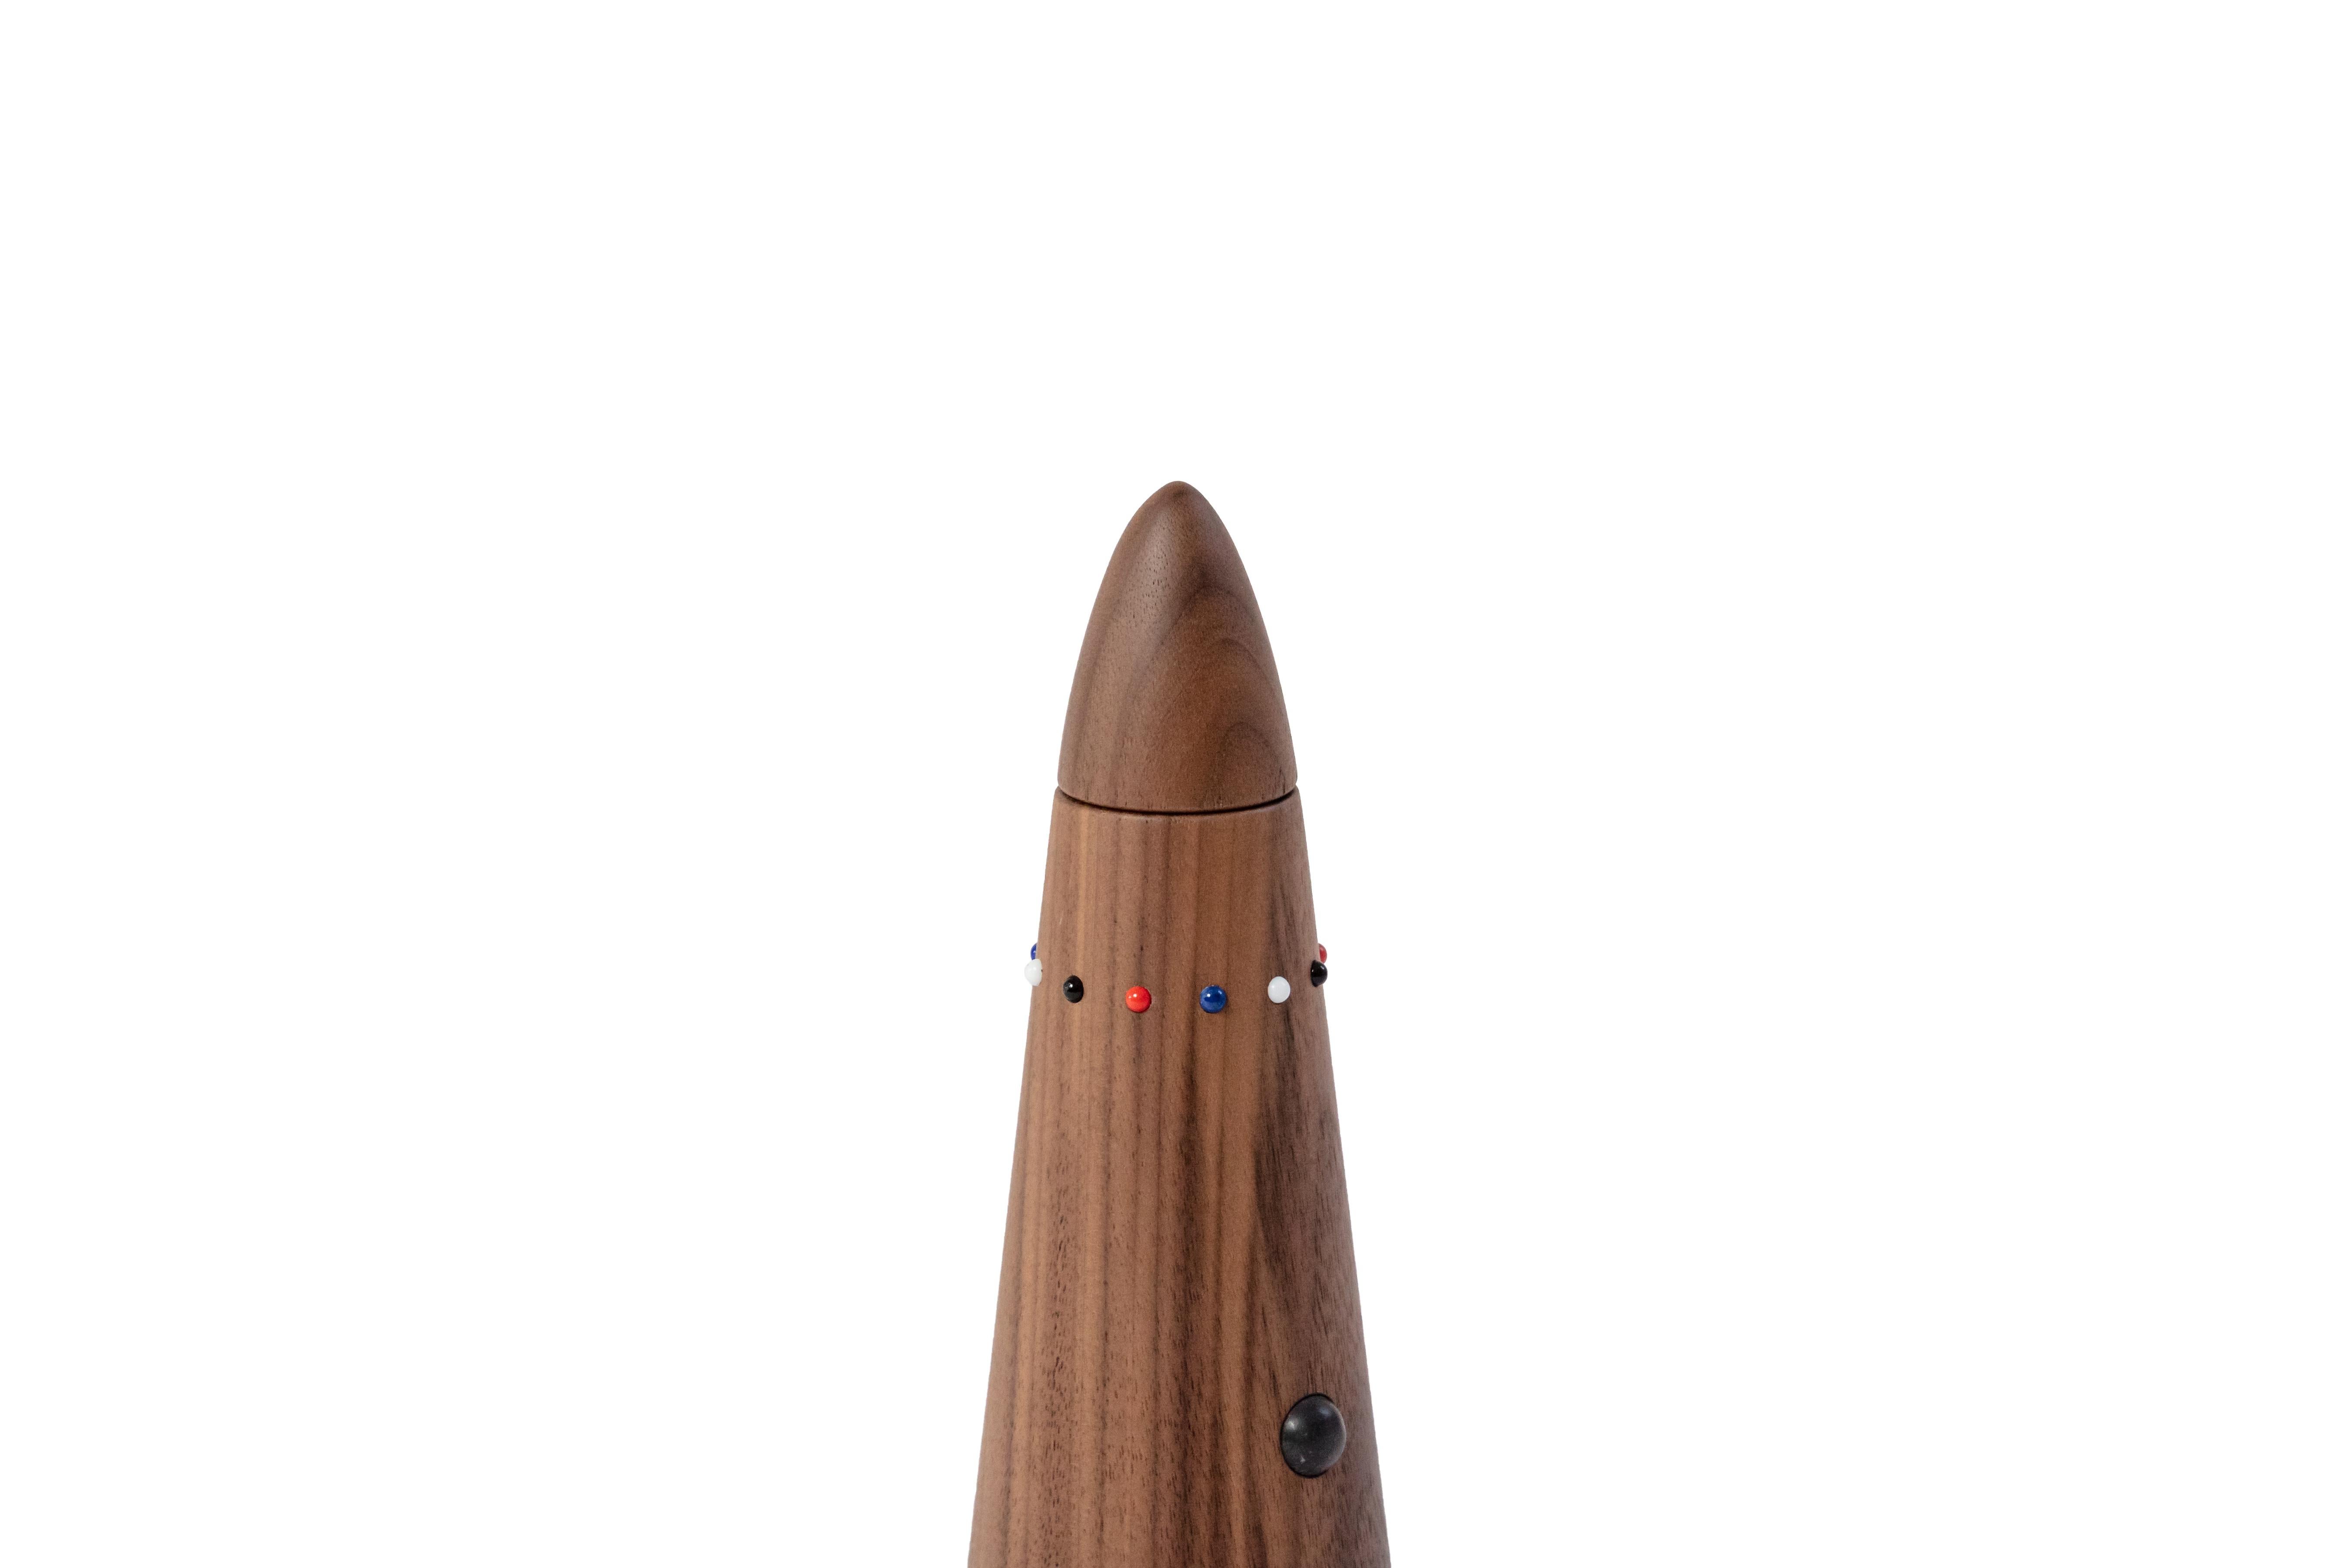 Walnut Salt mill and pepper grinder set in walnut wood from the SoShiro Pok collection For Sale